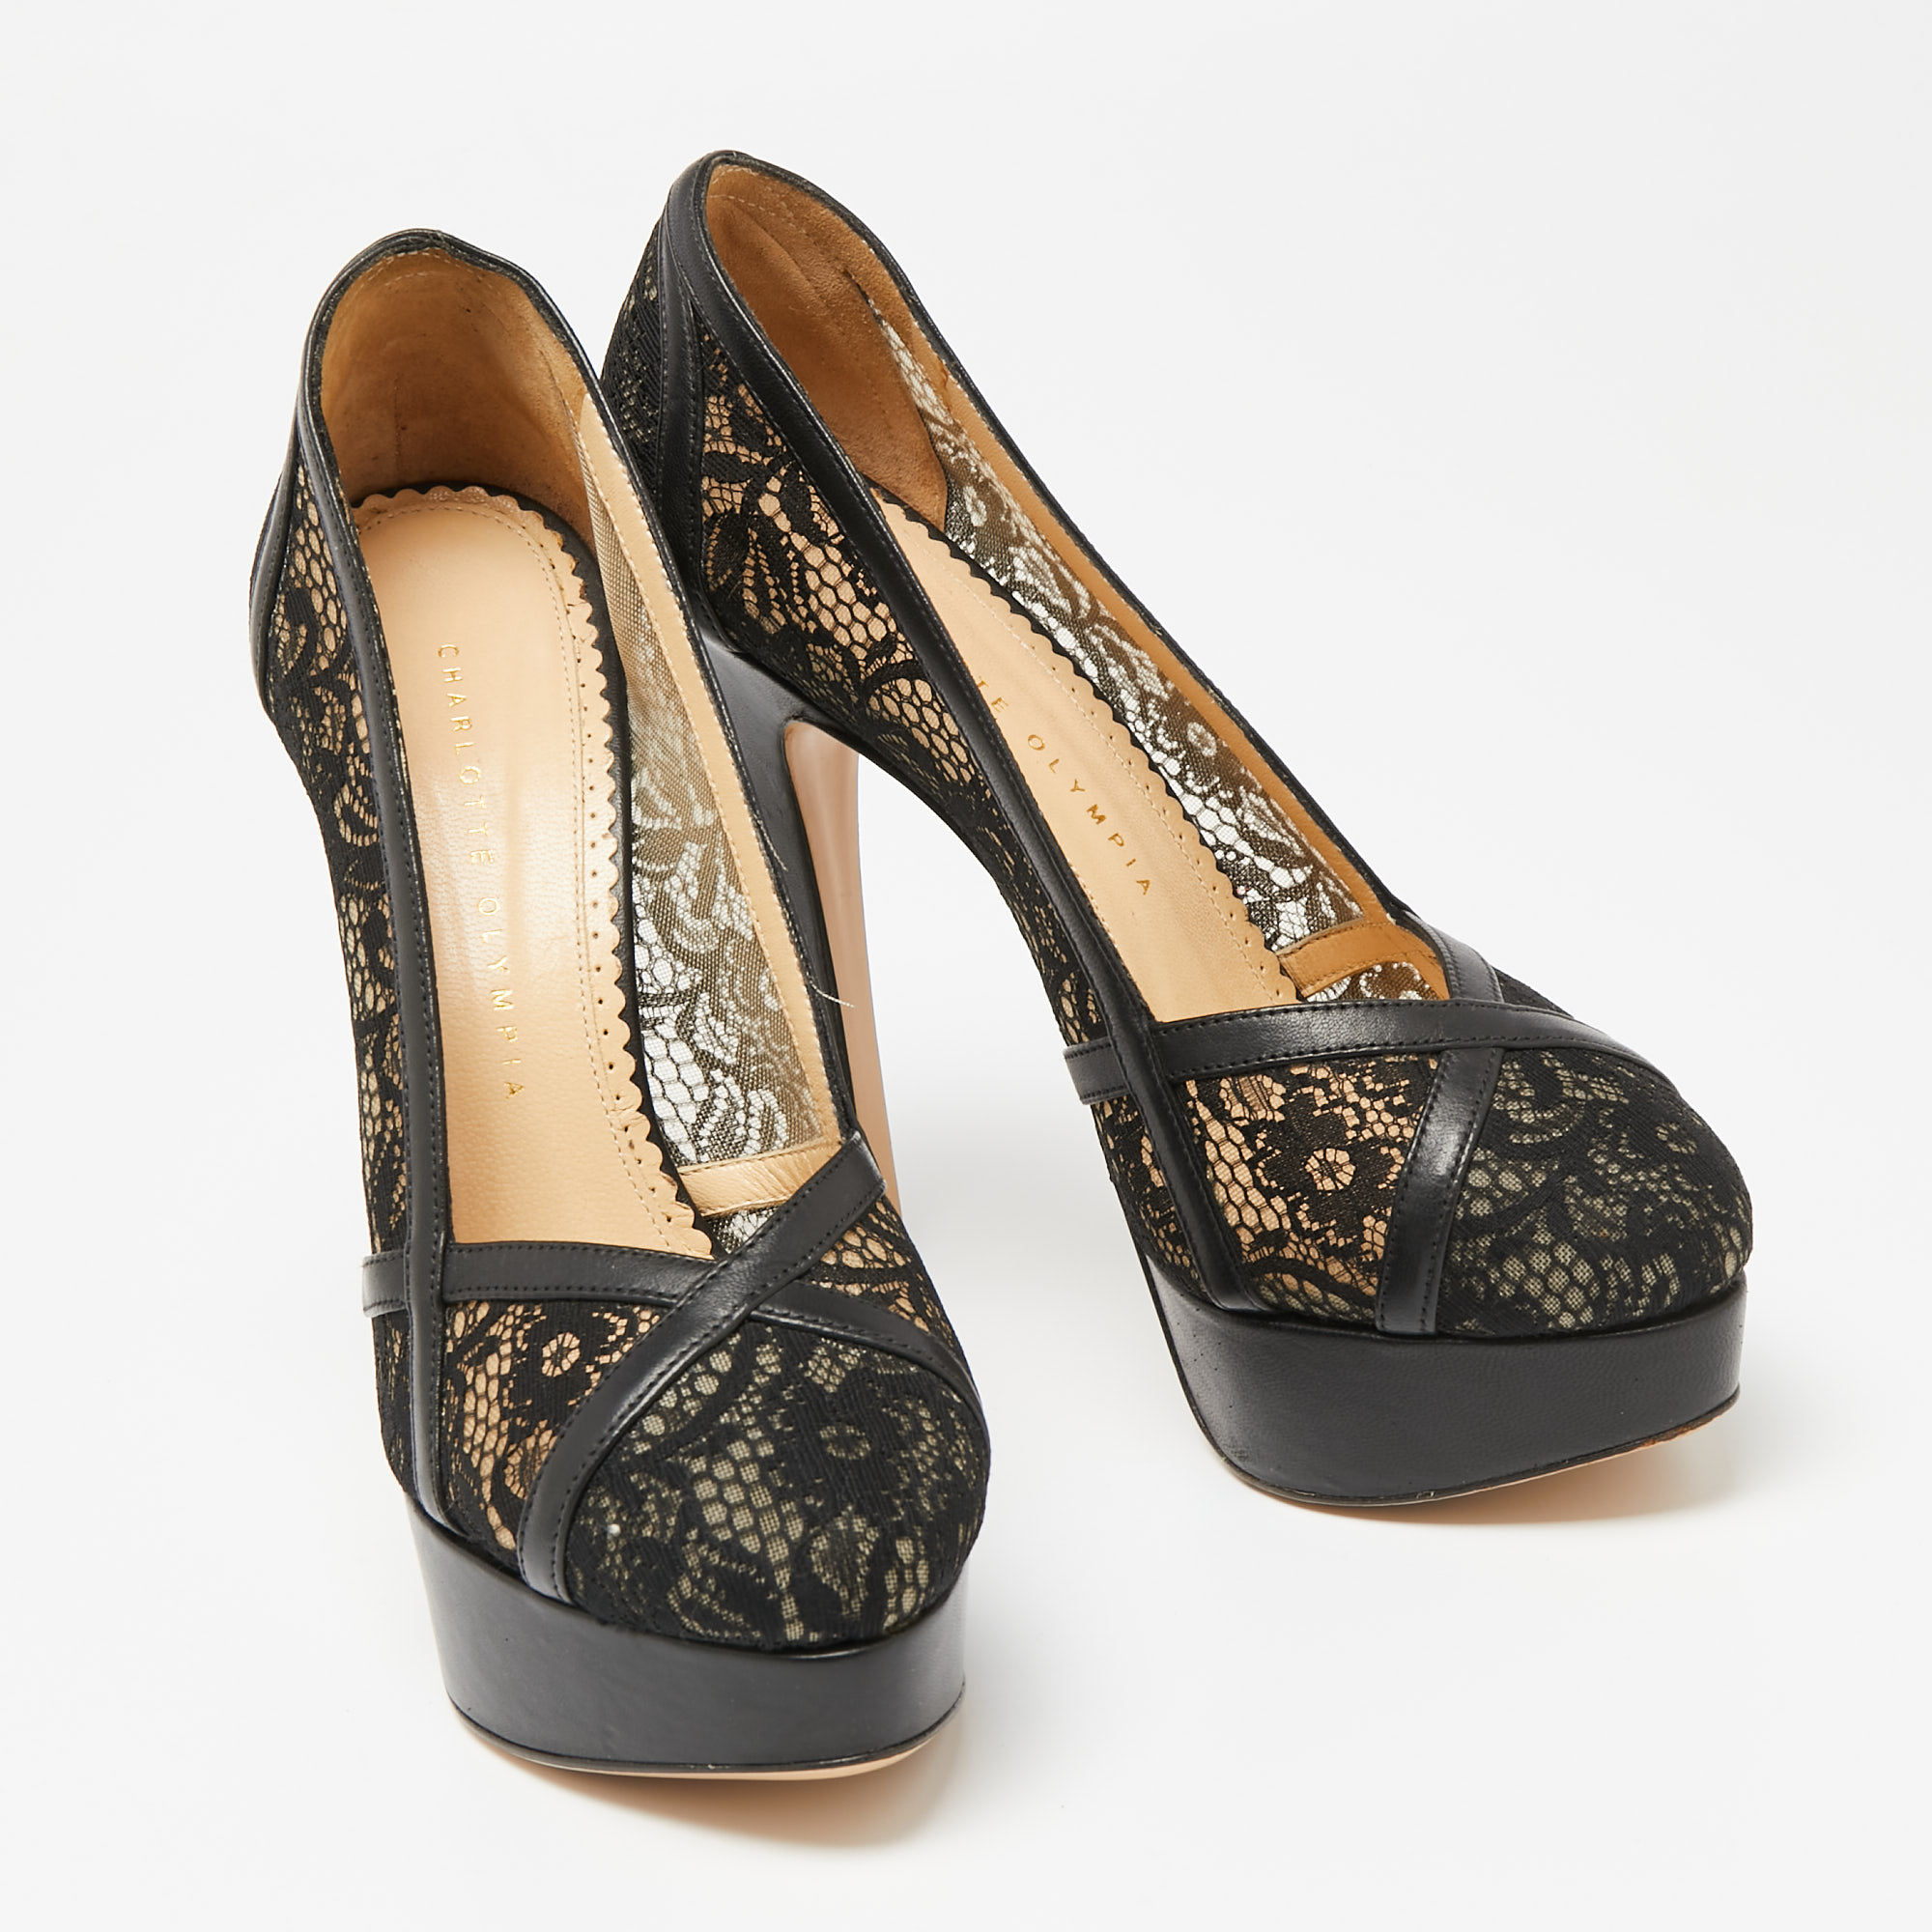 Charlotte Olympia Black Leather And Lace Platform Pumps Size 38.5